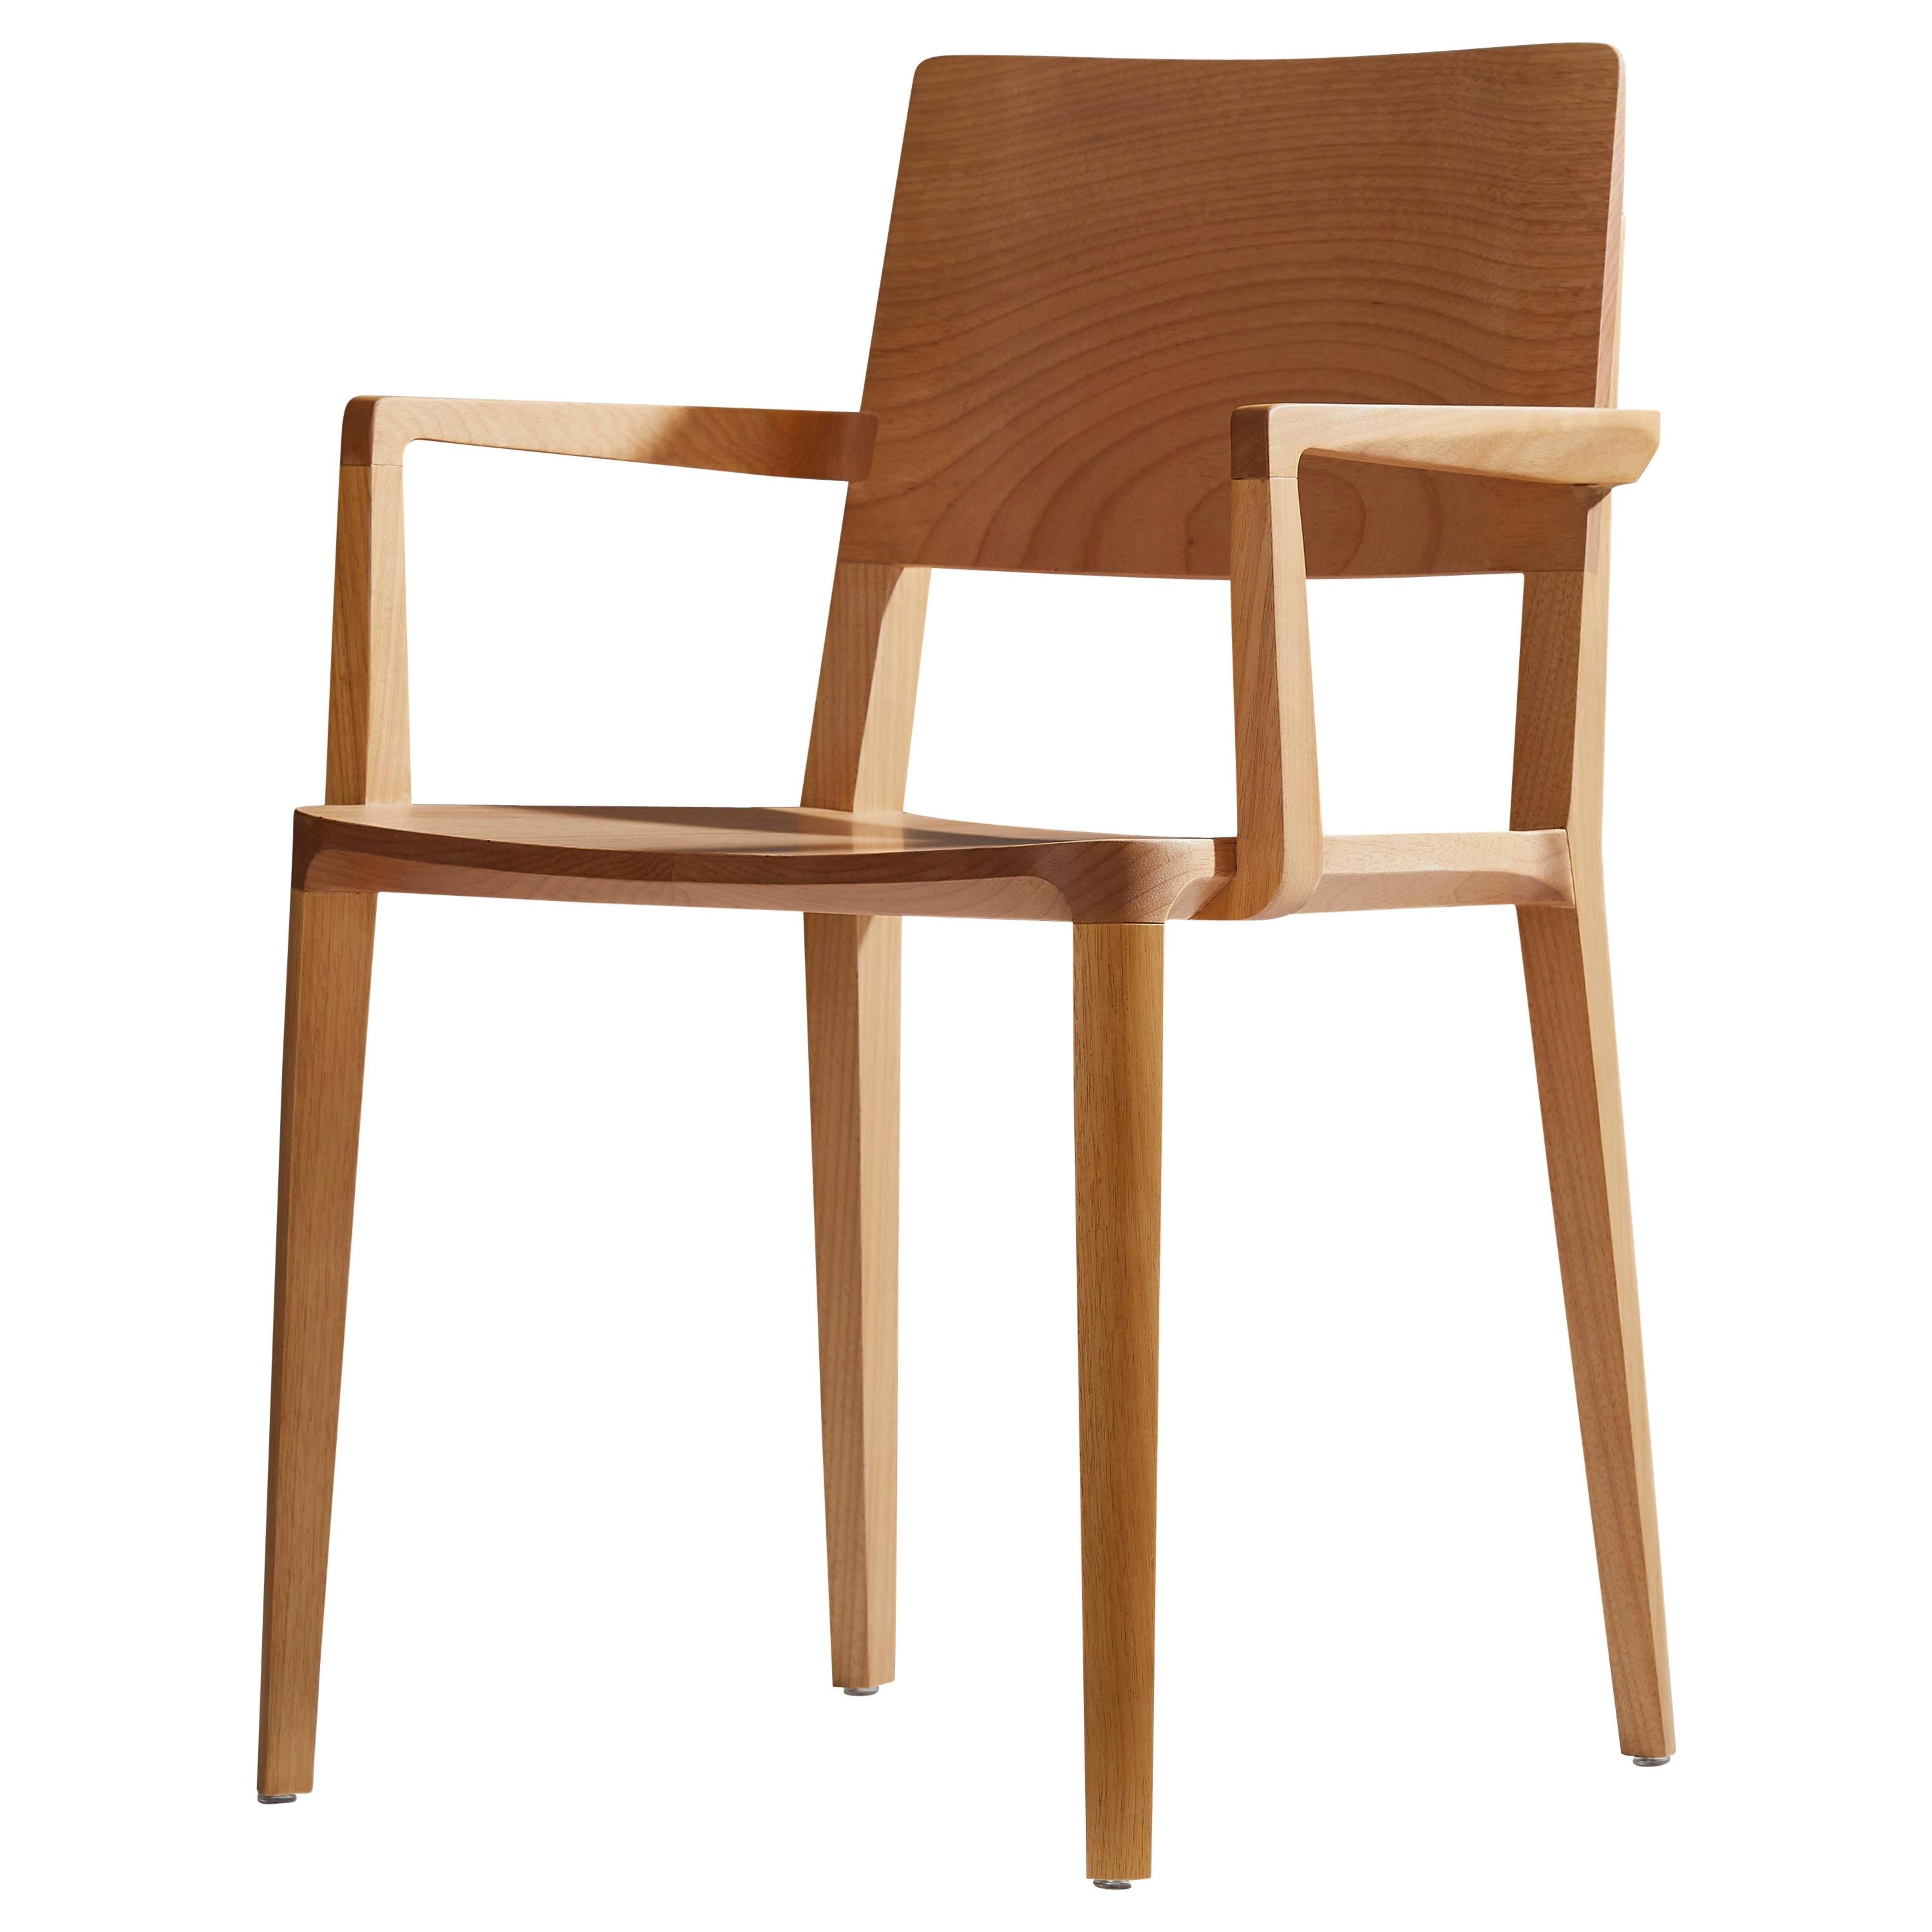 Minimalist Modern Chair in Natural Solid Wood with Arms